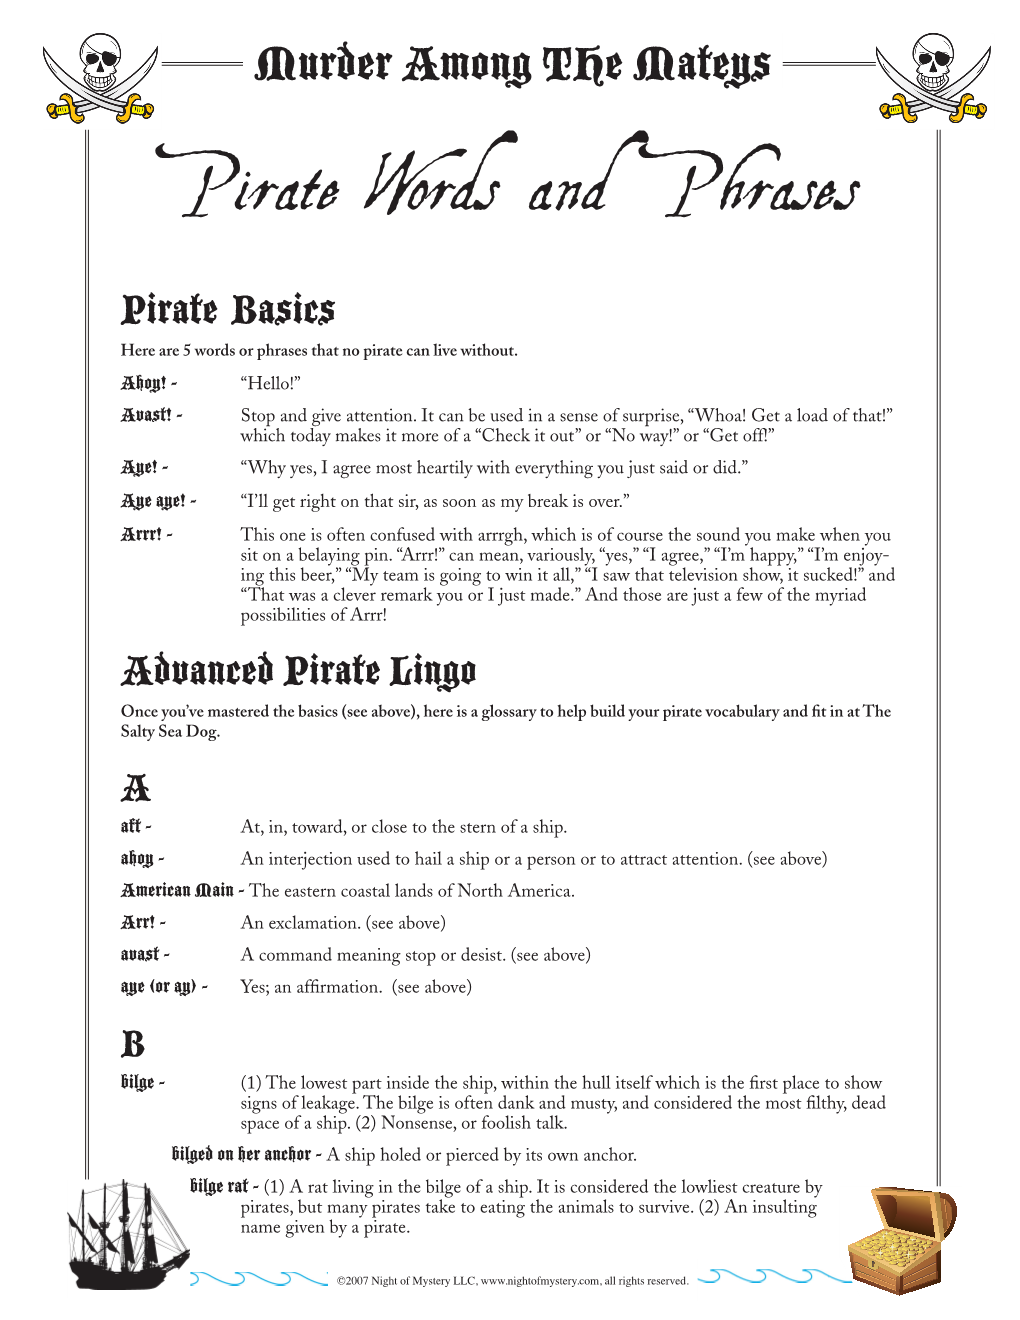 Pirate Words and Phrases Pirate Basics Here Are 5 Words Or Phrases That No Pirate Can Live Without